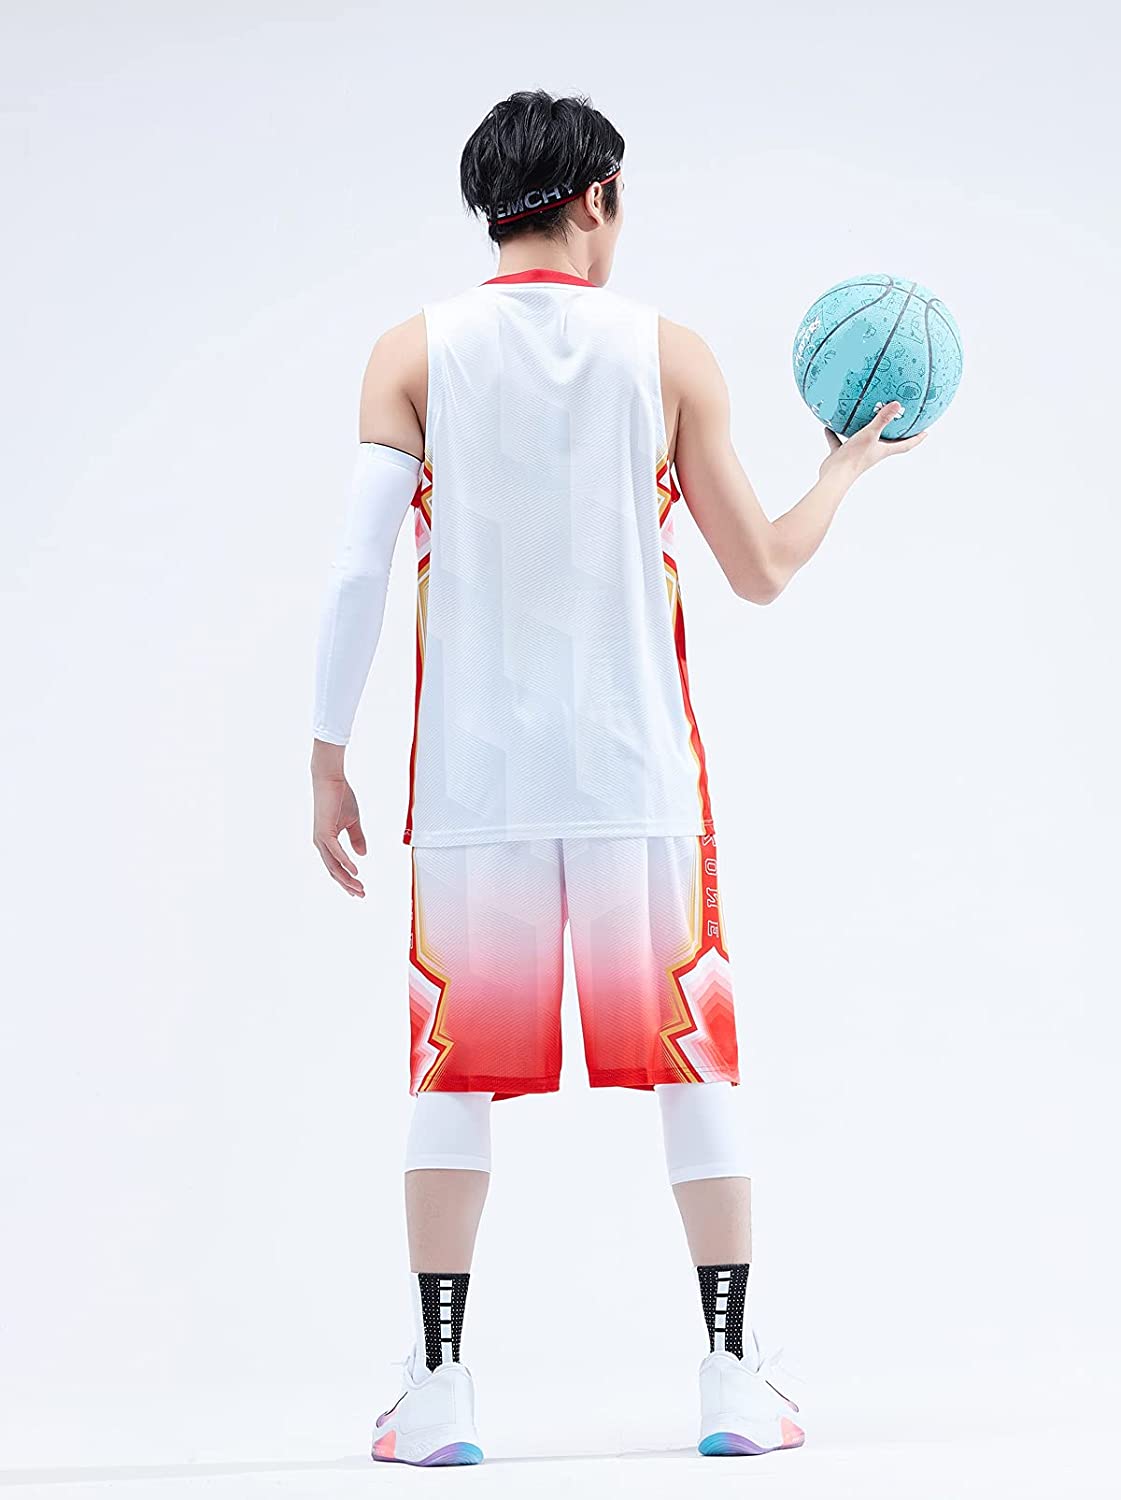  Topeter Reversible Basketball Jersey with Athletic Shorts,  Practice Sports Training Uniforms for Men : Clothing, Shoes & Jewelry